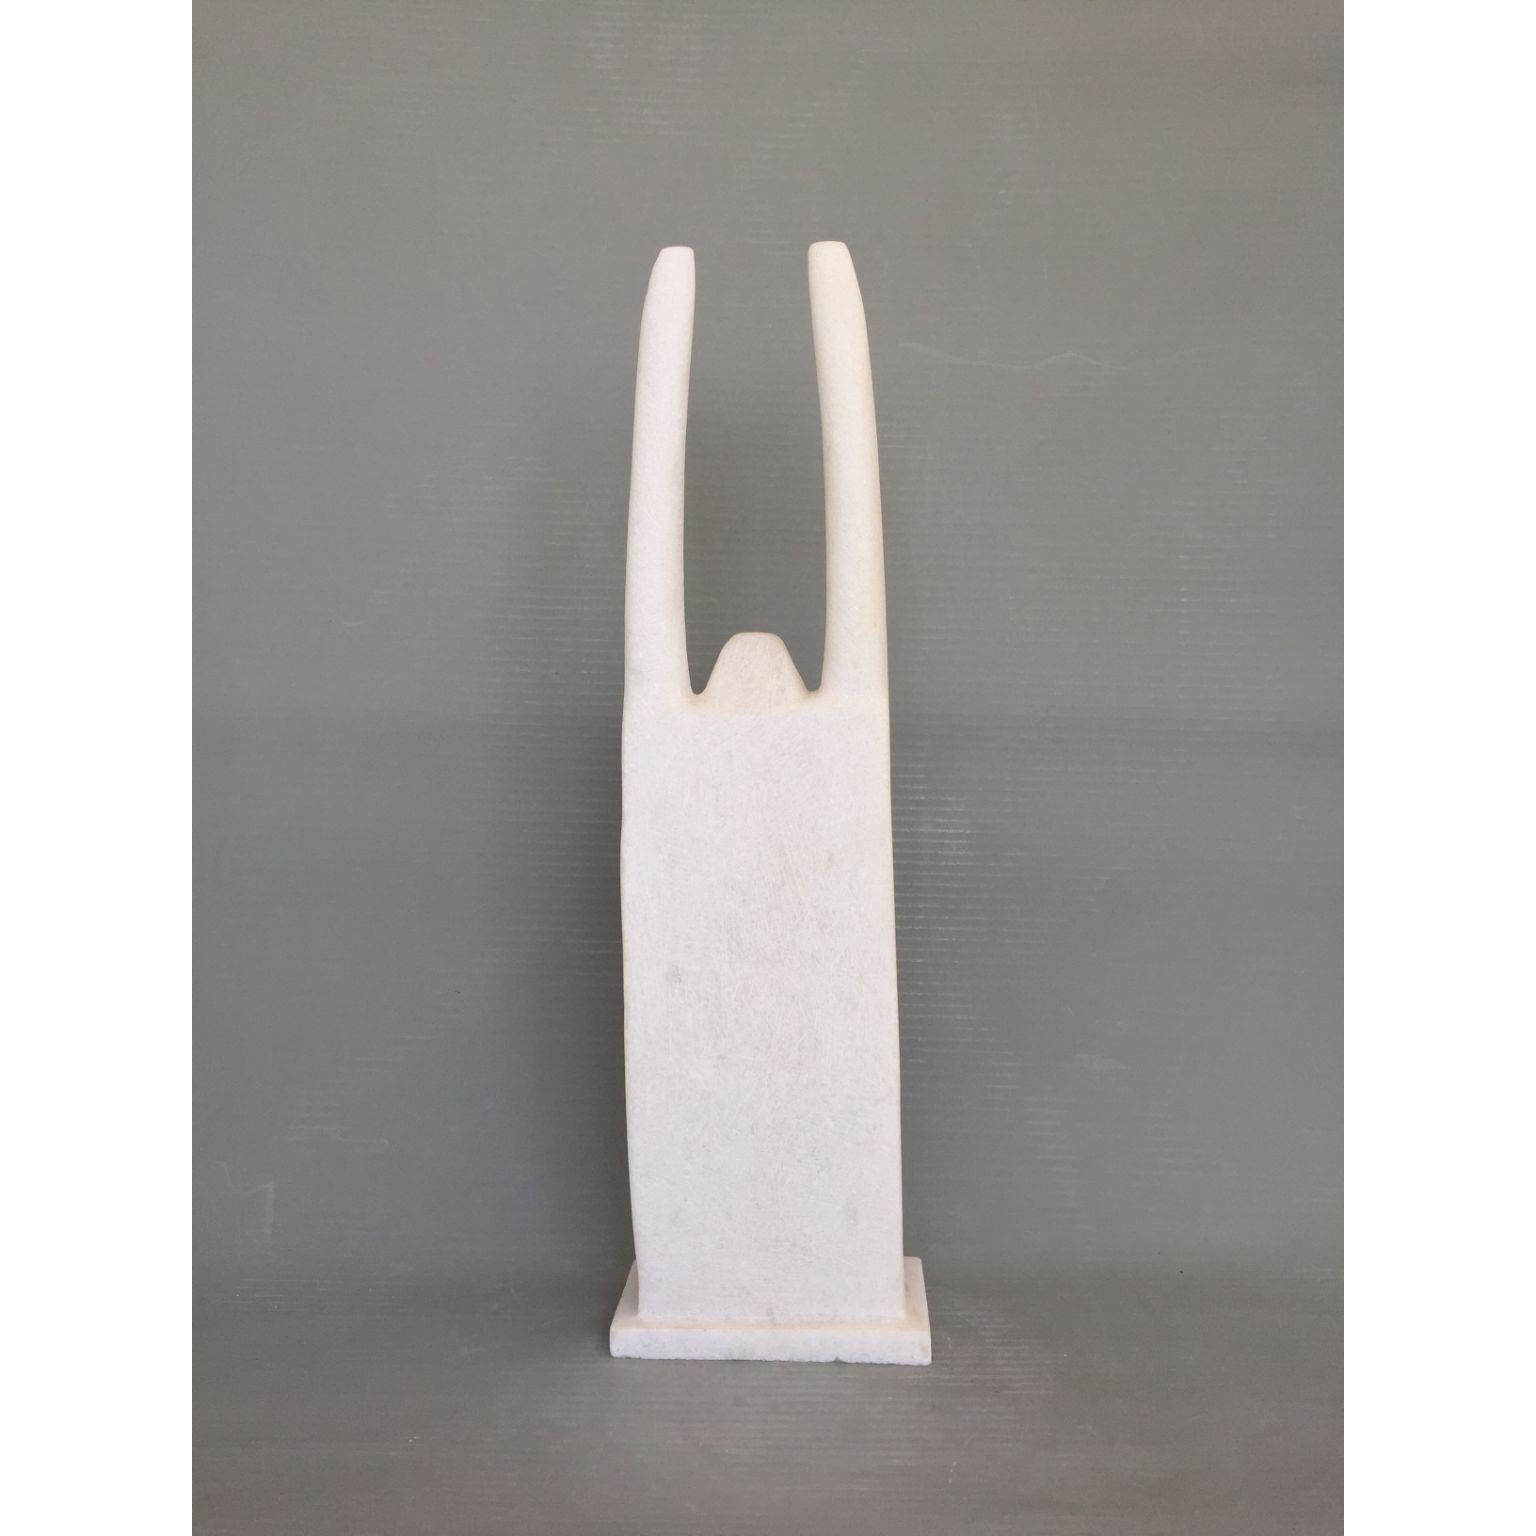 Madea hand carved marble sculpture by Tom Von Kaenel
Dimensions: D15 x W5 x H52 cm
Materials: Marble

Tom von Kaenel, sculptor and painter, was born in Switzerland in 1961. Already in his early
childhood he was deeply devoted to art. His desire